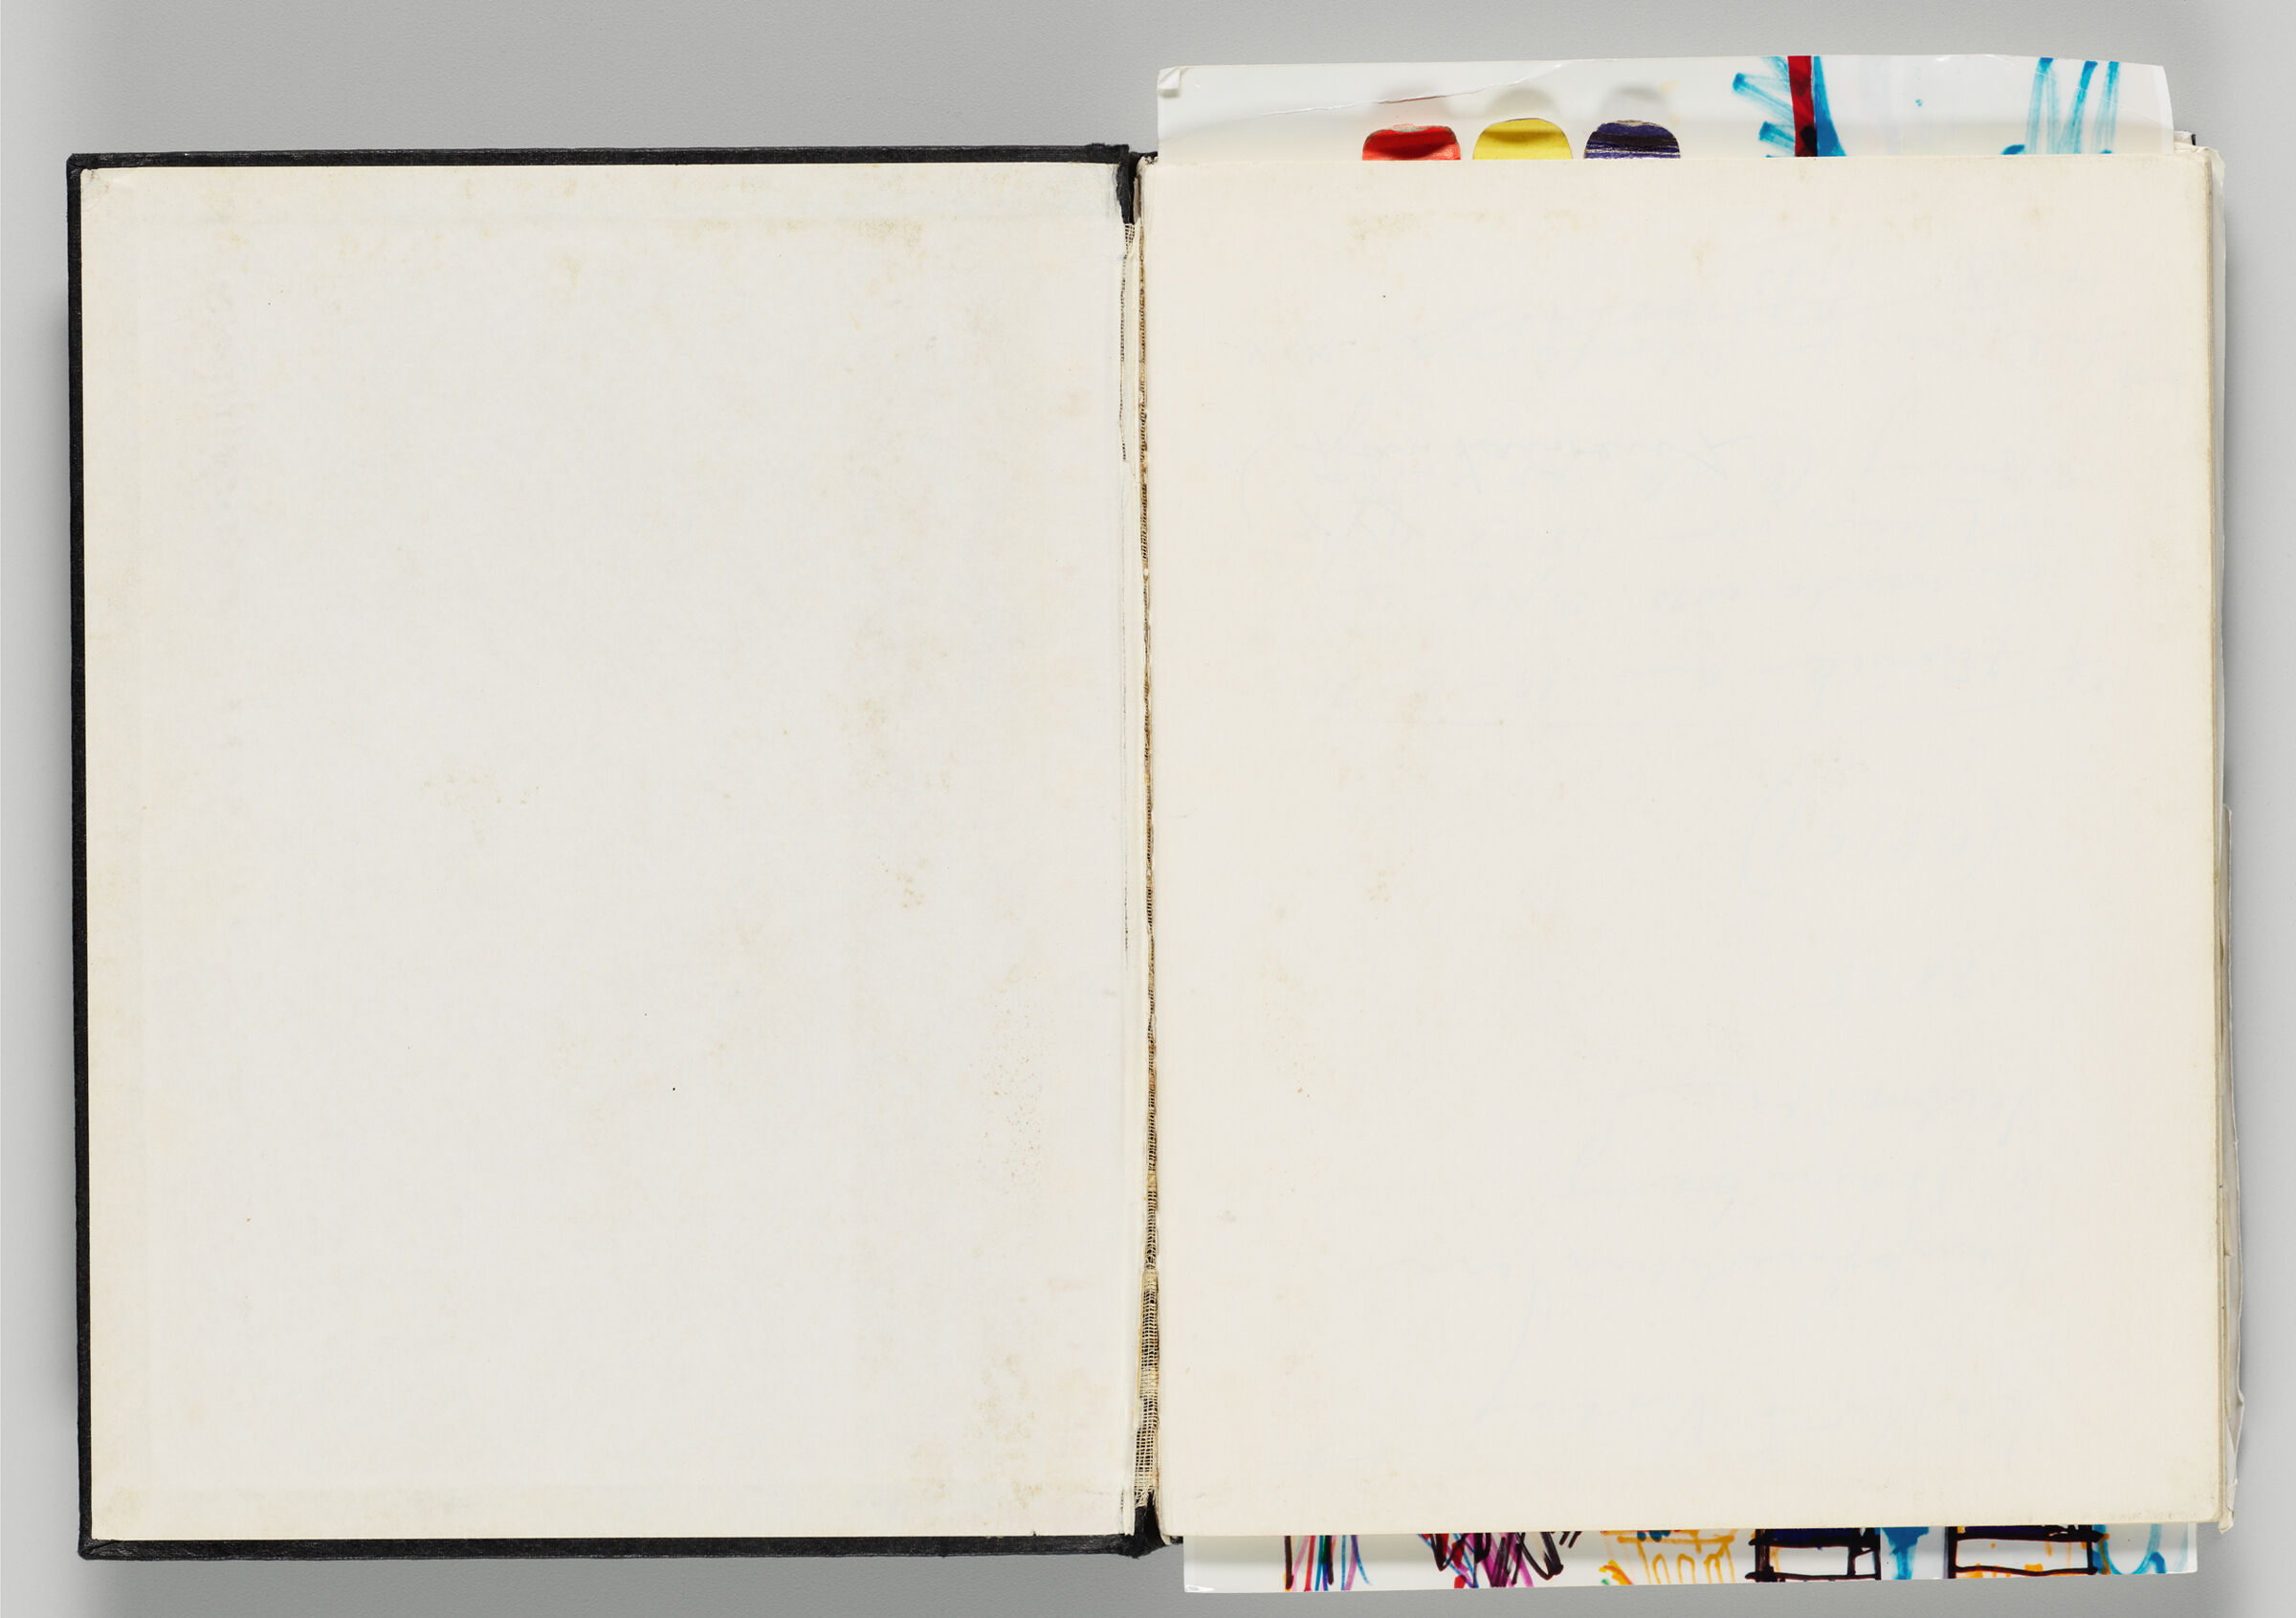 Untitled (Blank Front Endpaper, Left Page); Untitled (Blank, Right Page)